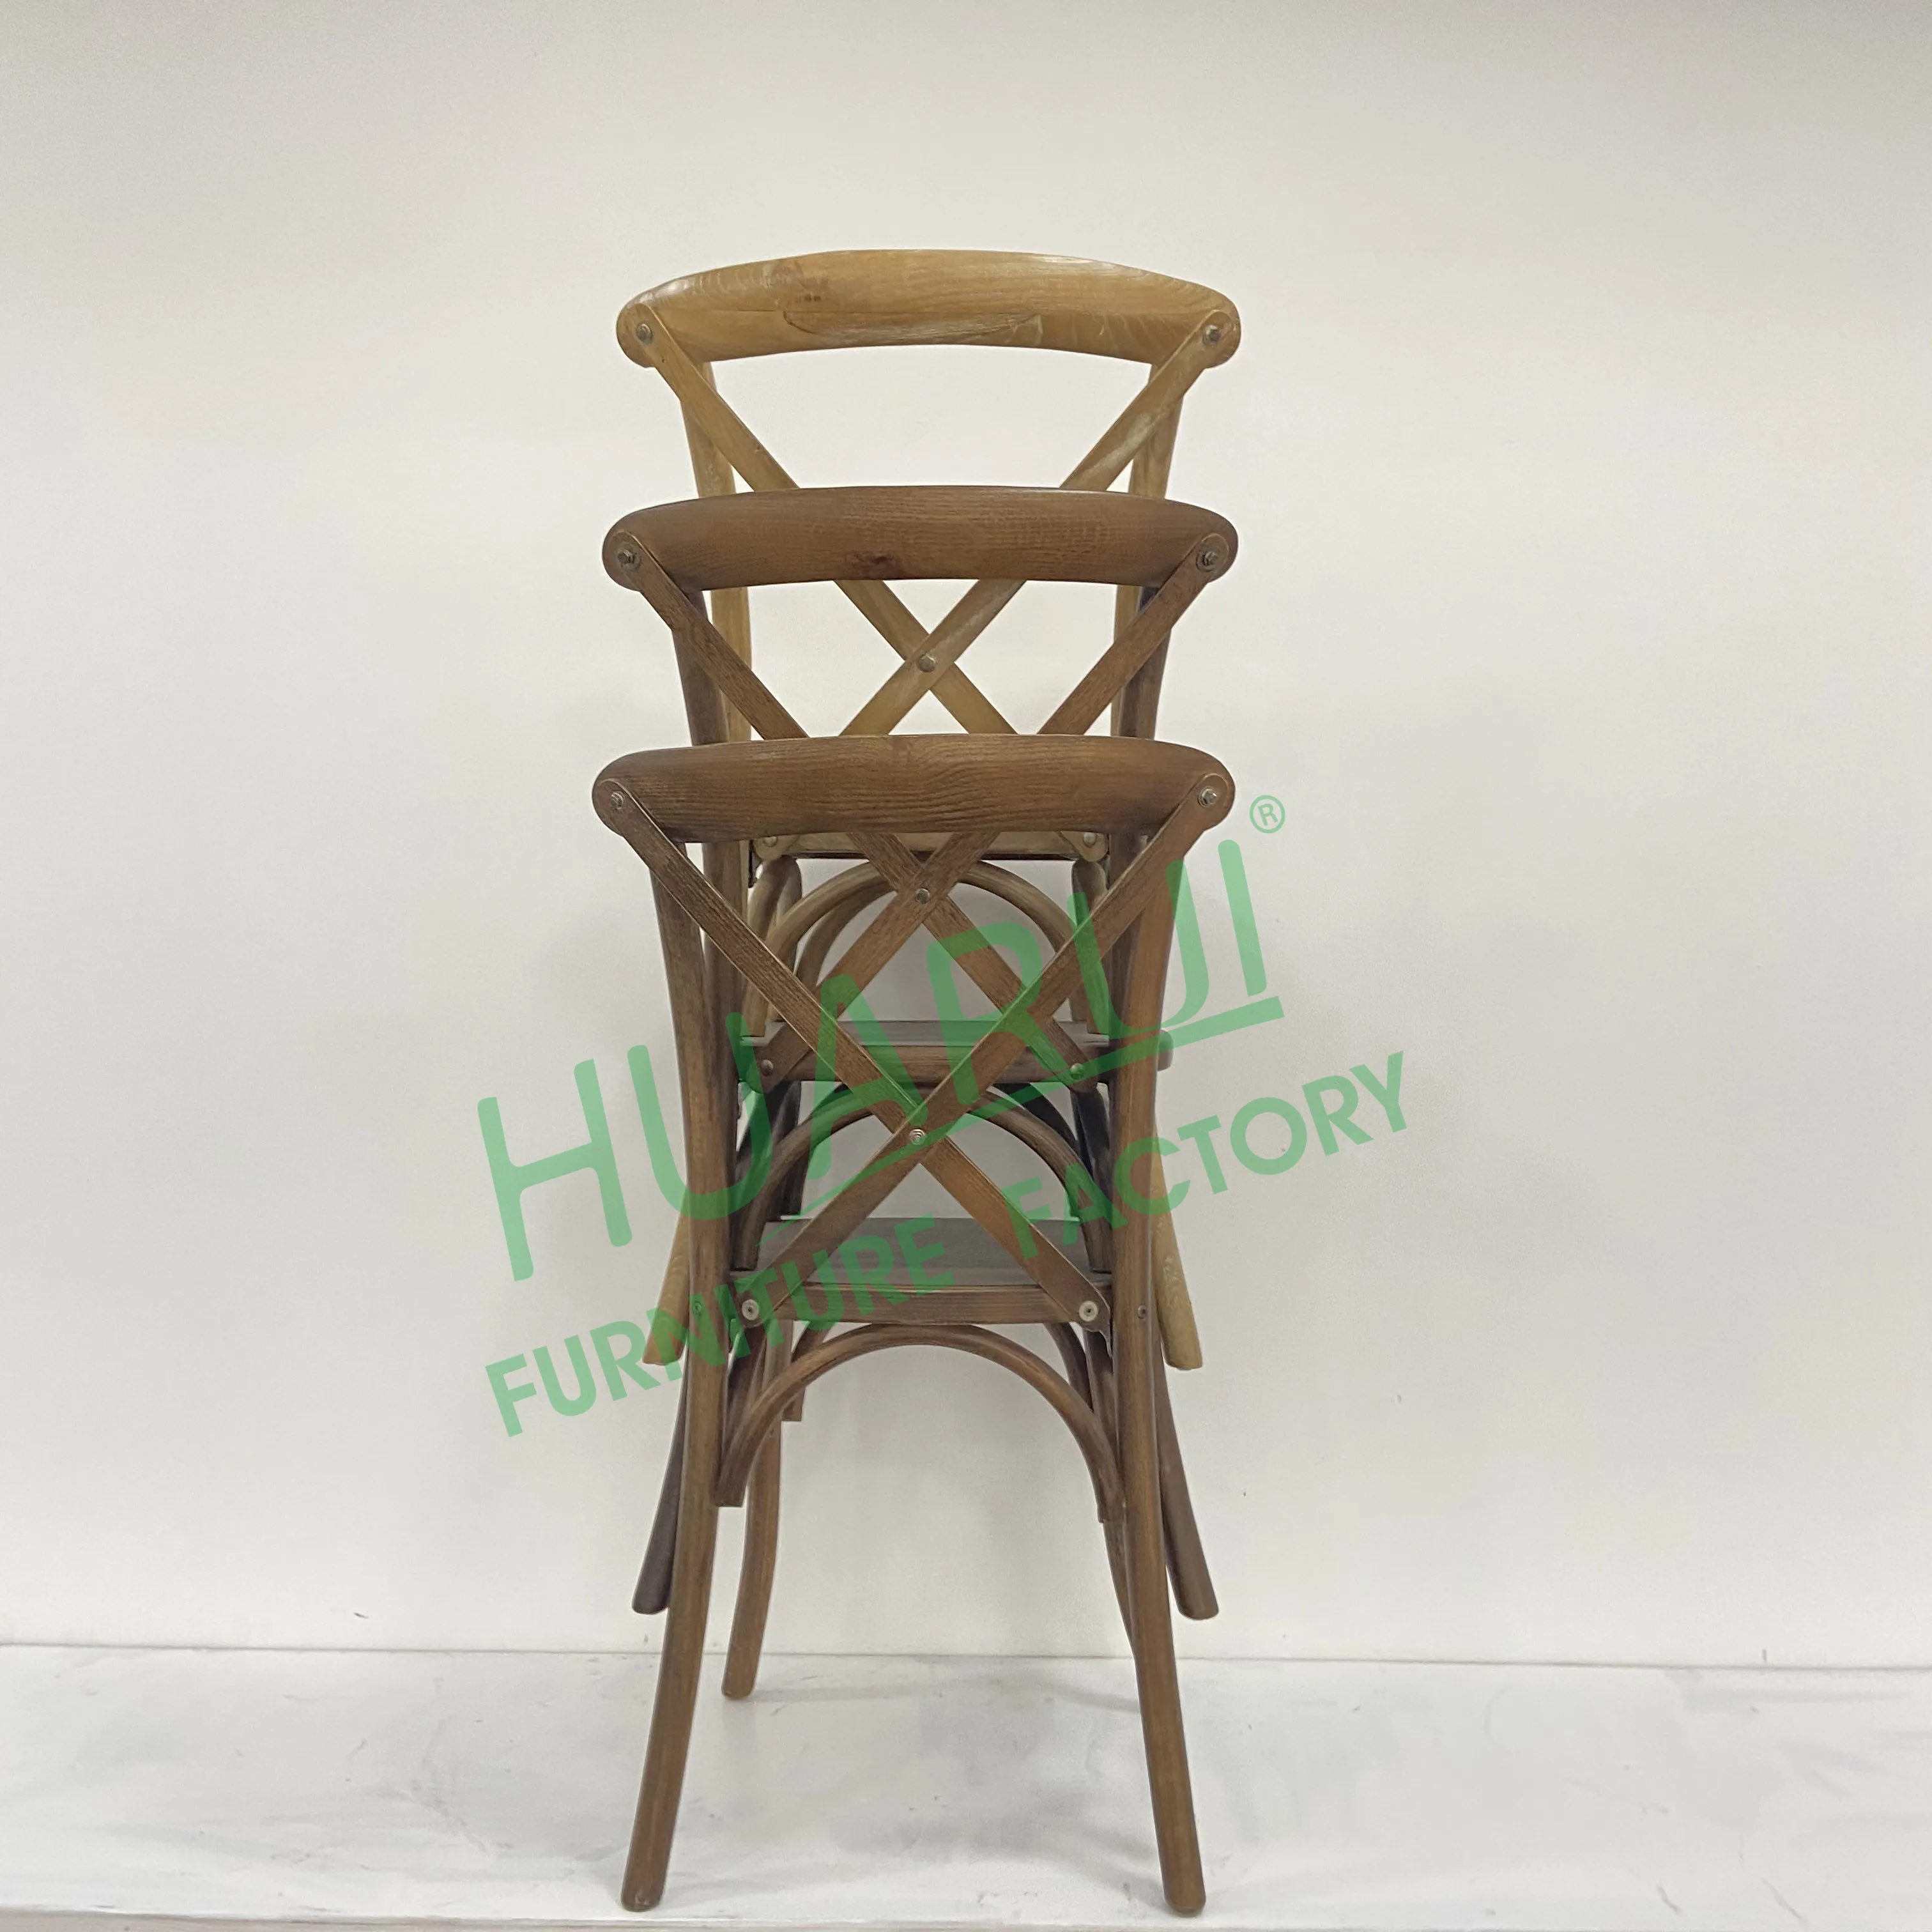 
Rental cheap french antique classic cross back chair 